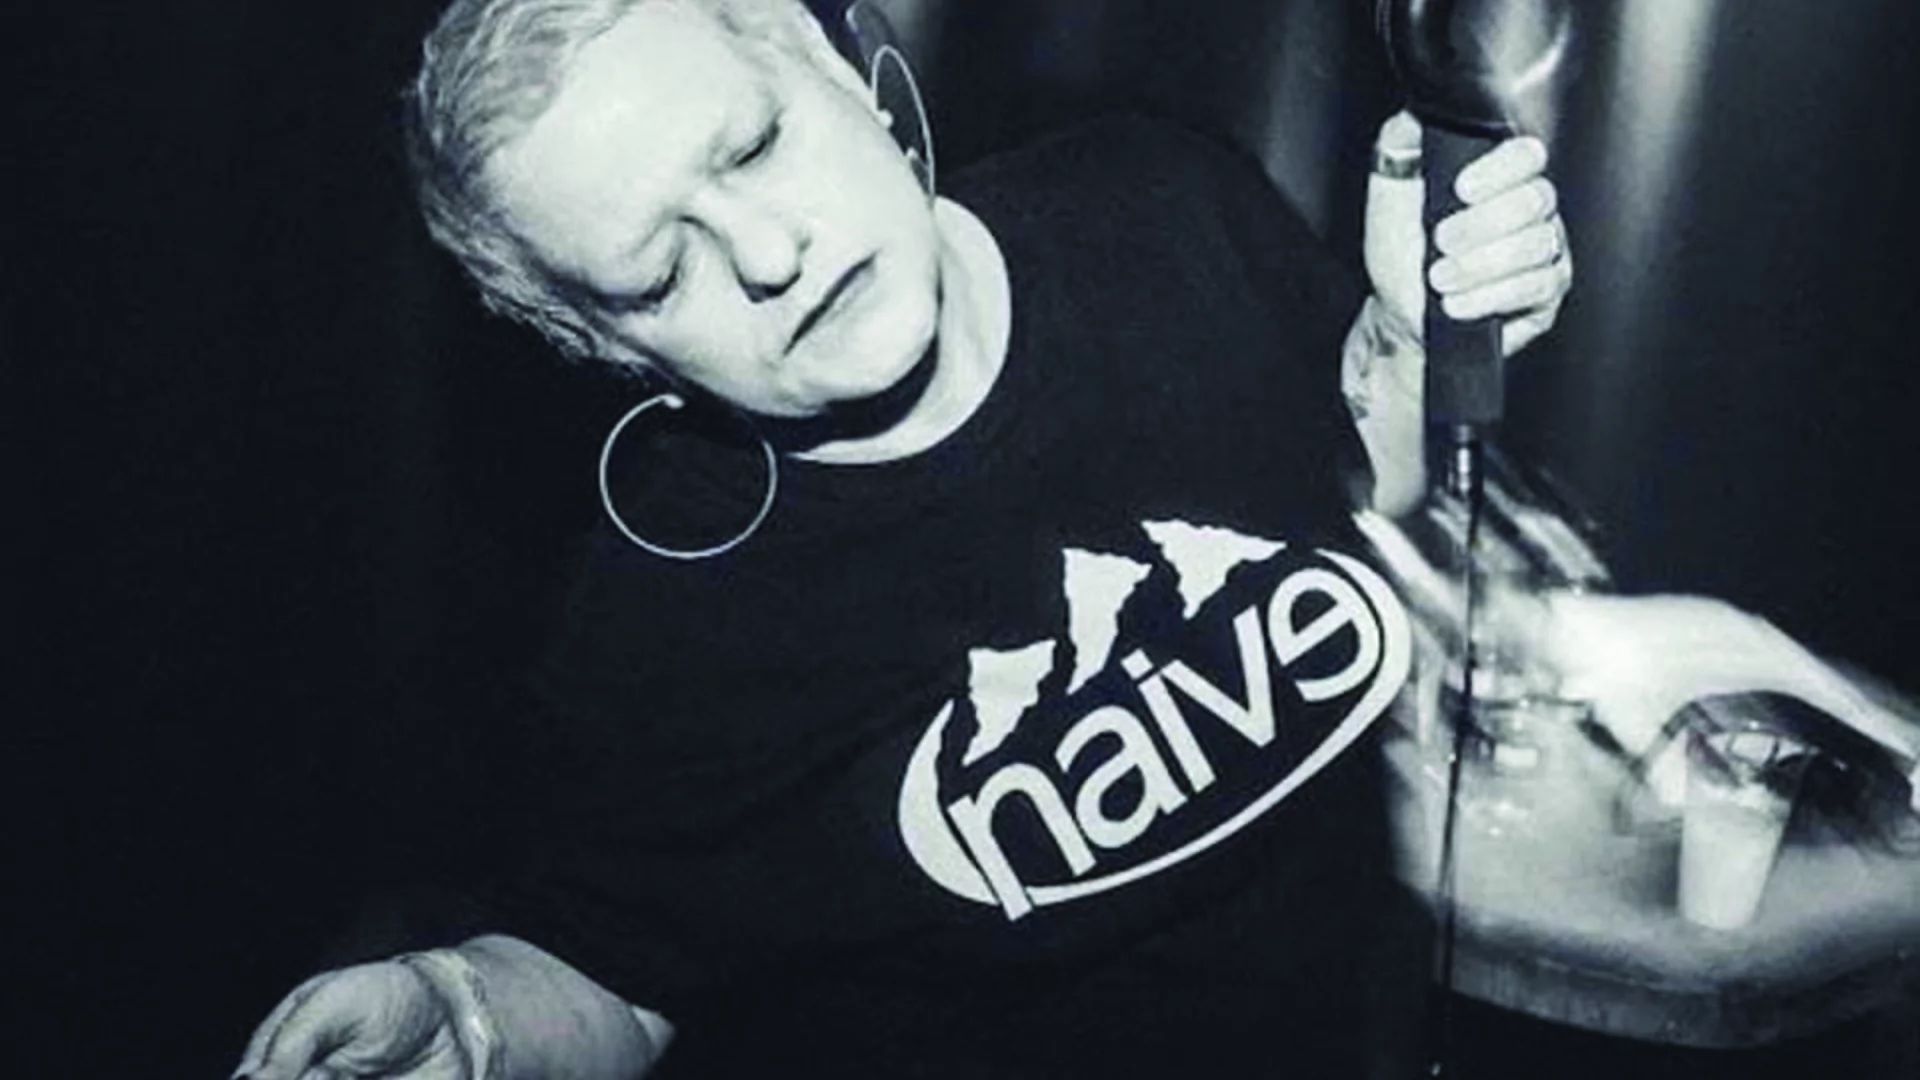 Black and white picture of Jaye Ward dancing while holding DJ headphones, wearing a Naive record label t-shirt